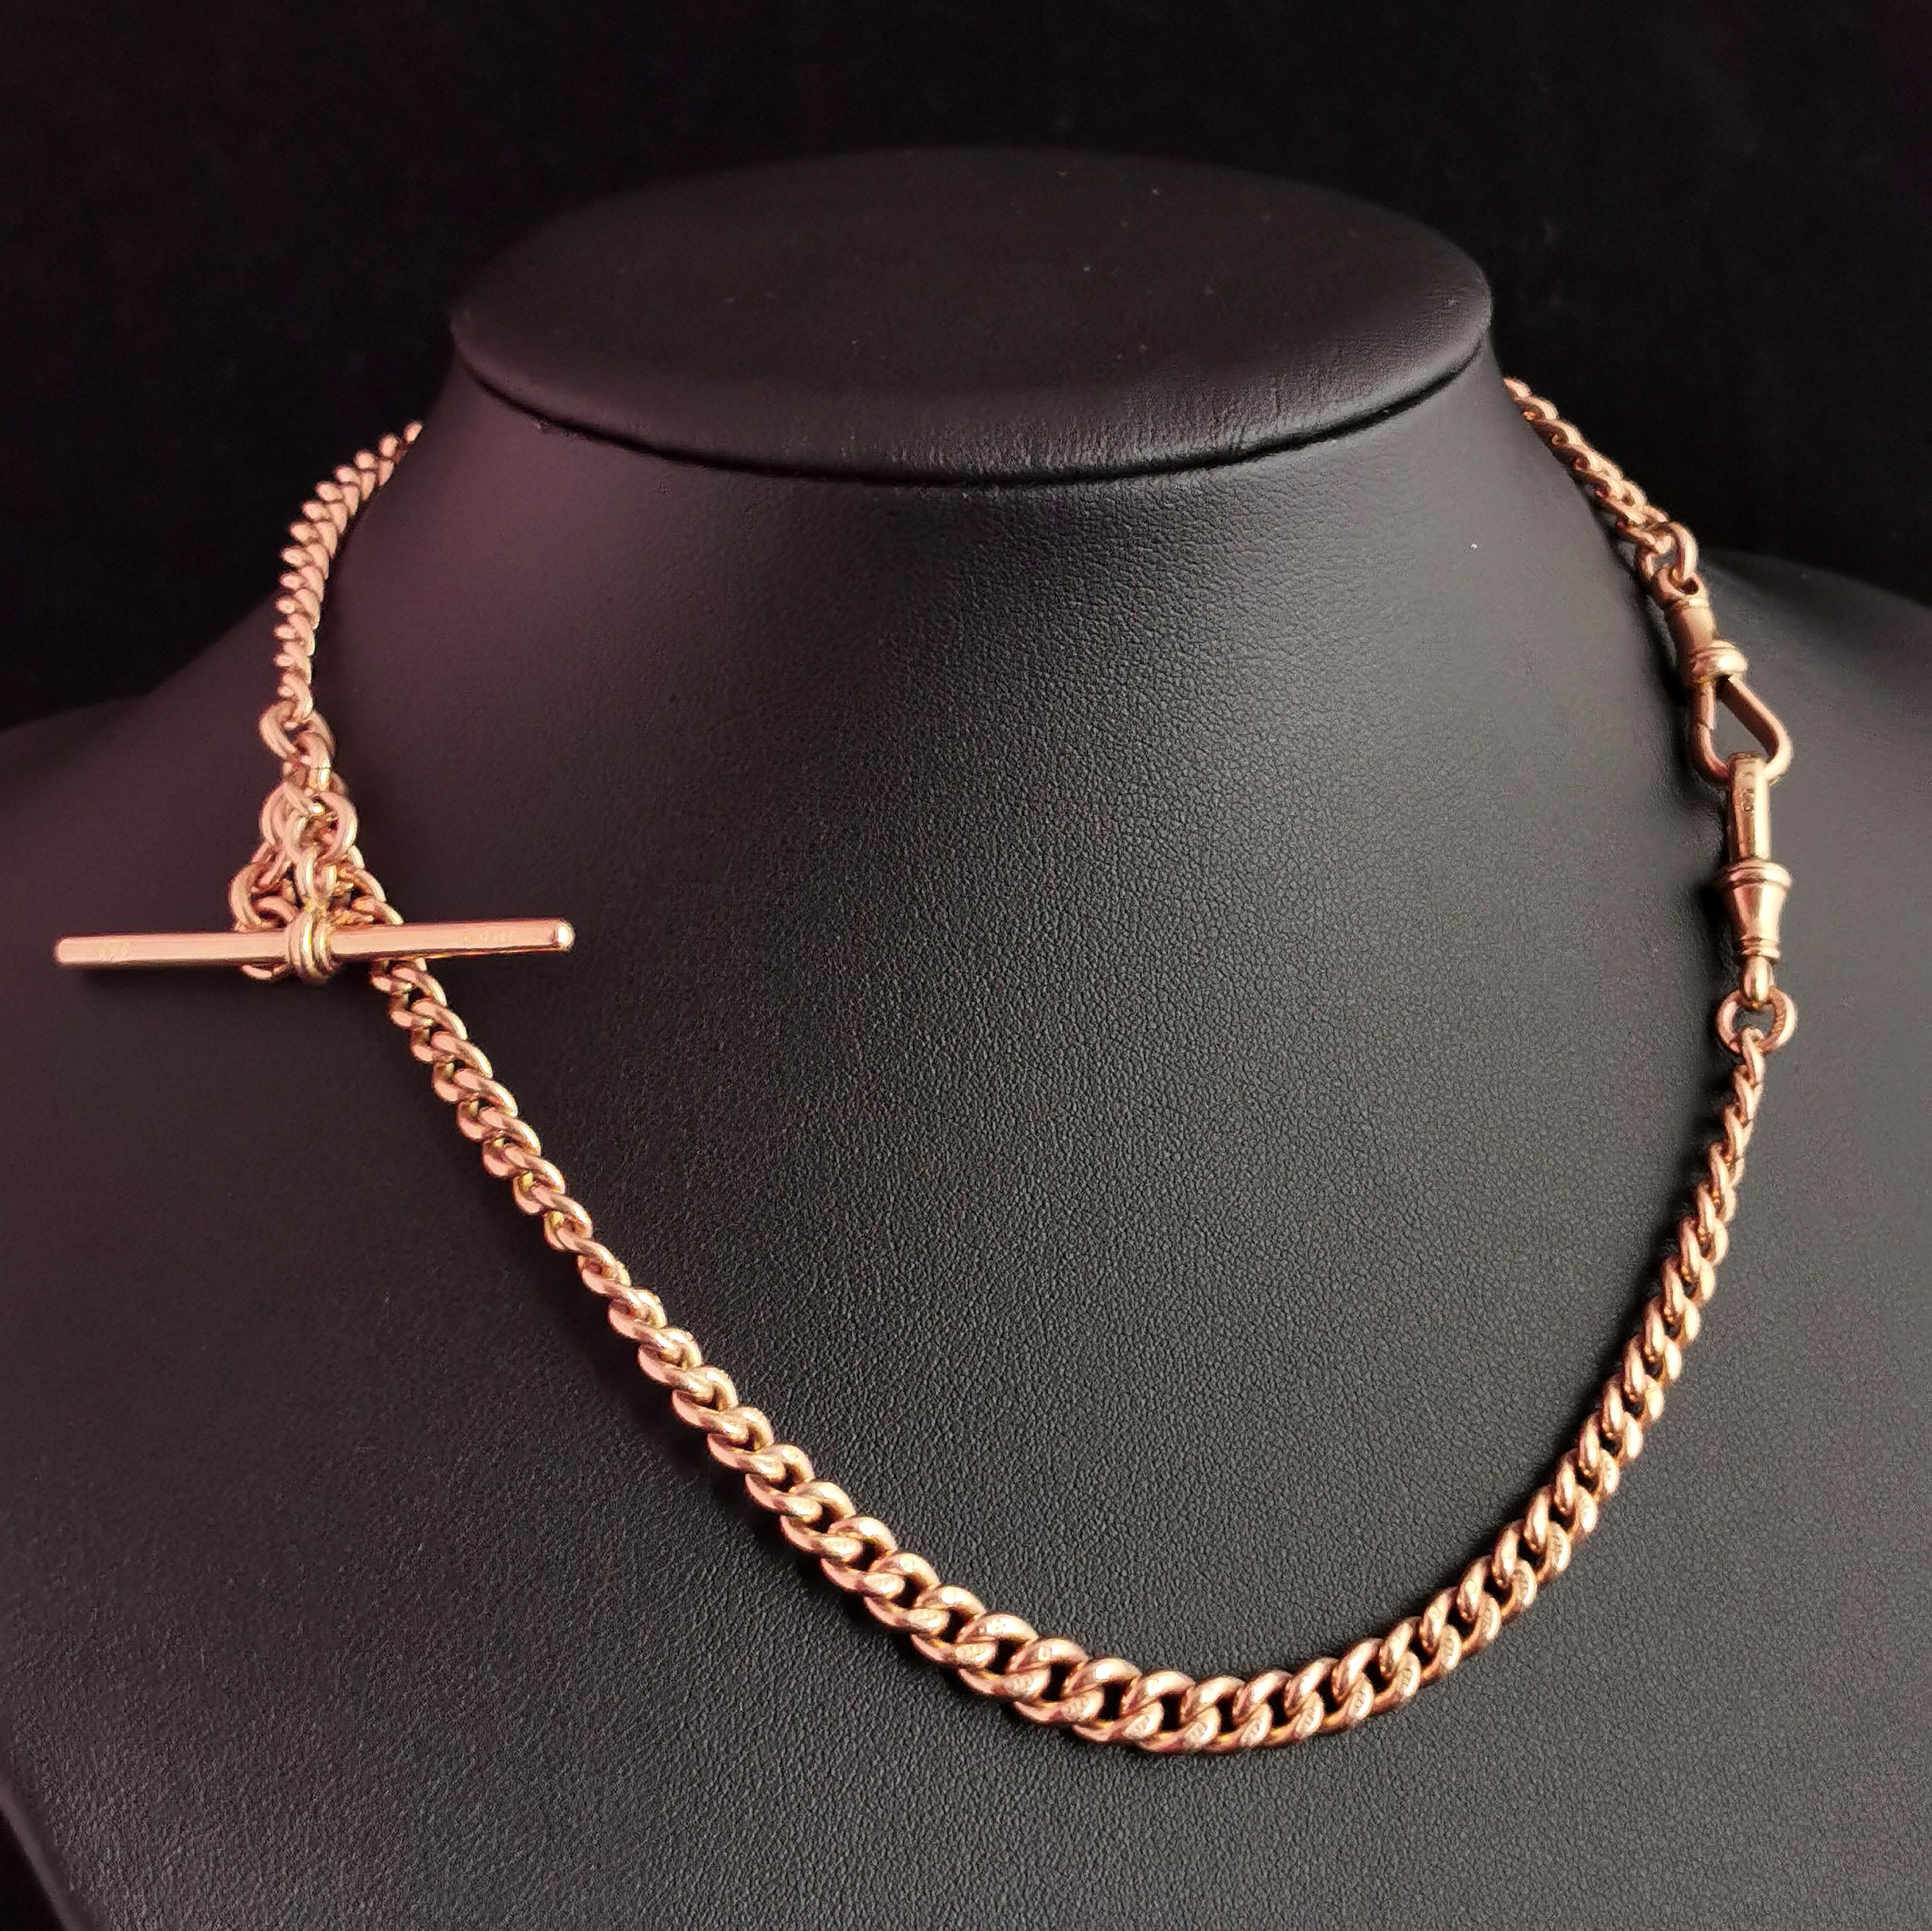 A handsome antique Edwardian era 9ct gold Albert chain.

It is a curb link chain in 9ct Rose gold, each link individually stamped for 9ct gold, 9.375.

A double Albert chain graduating in link width with a T bar and two dog clip fasteners.

A